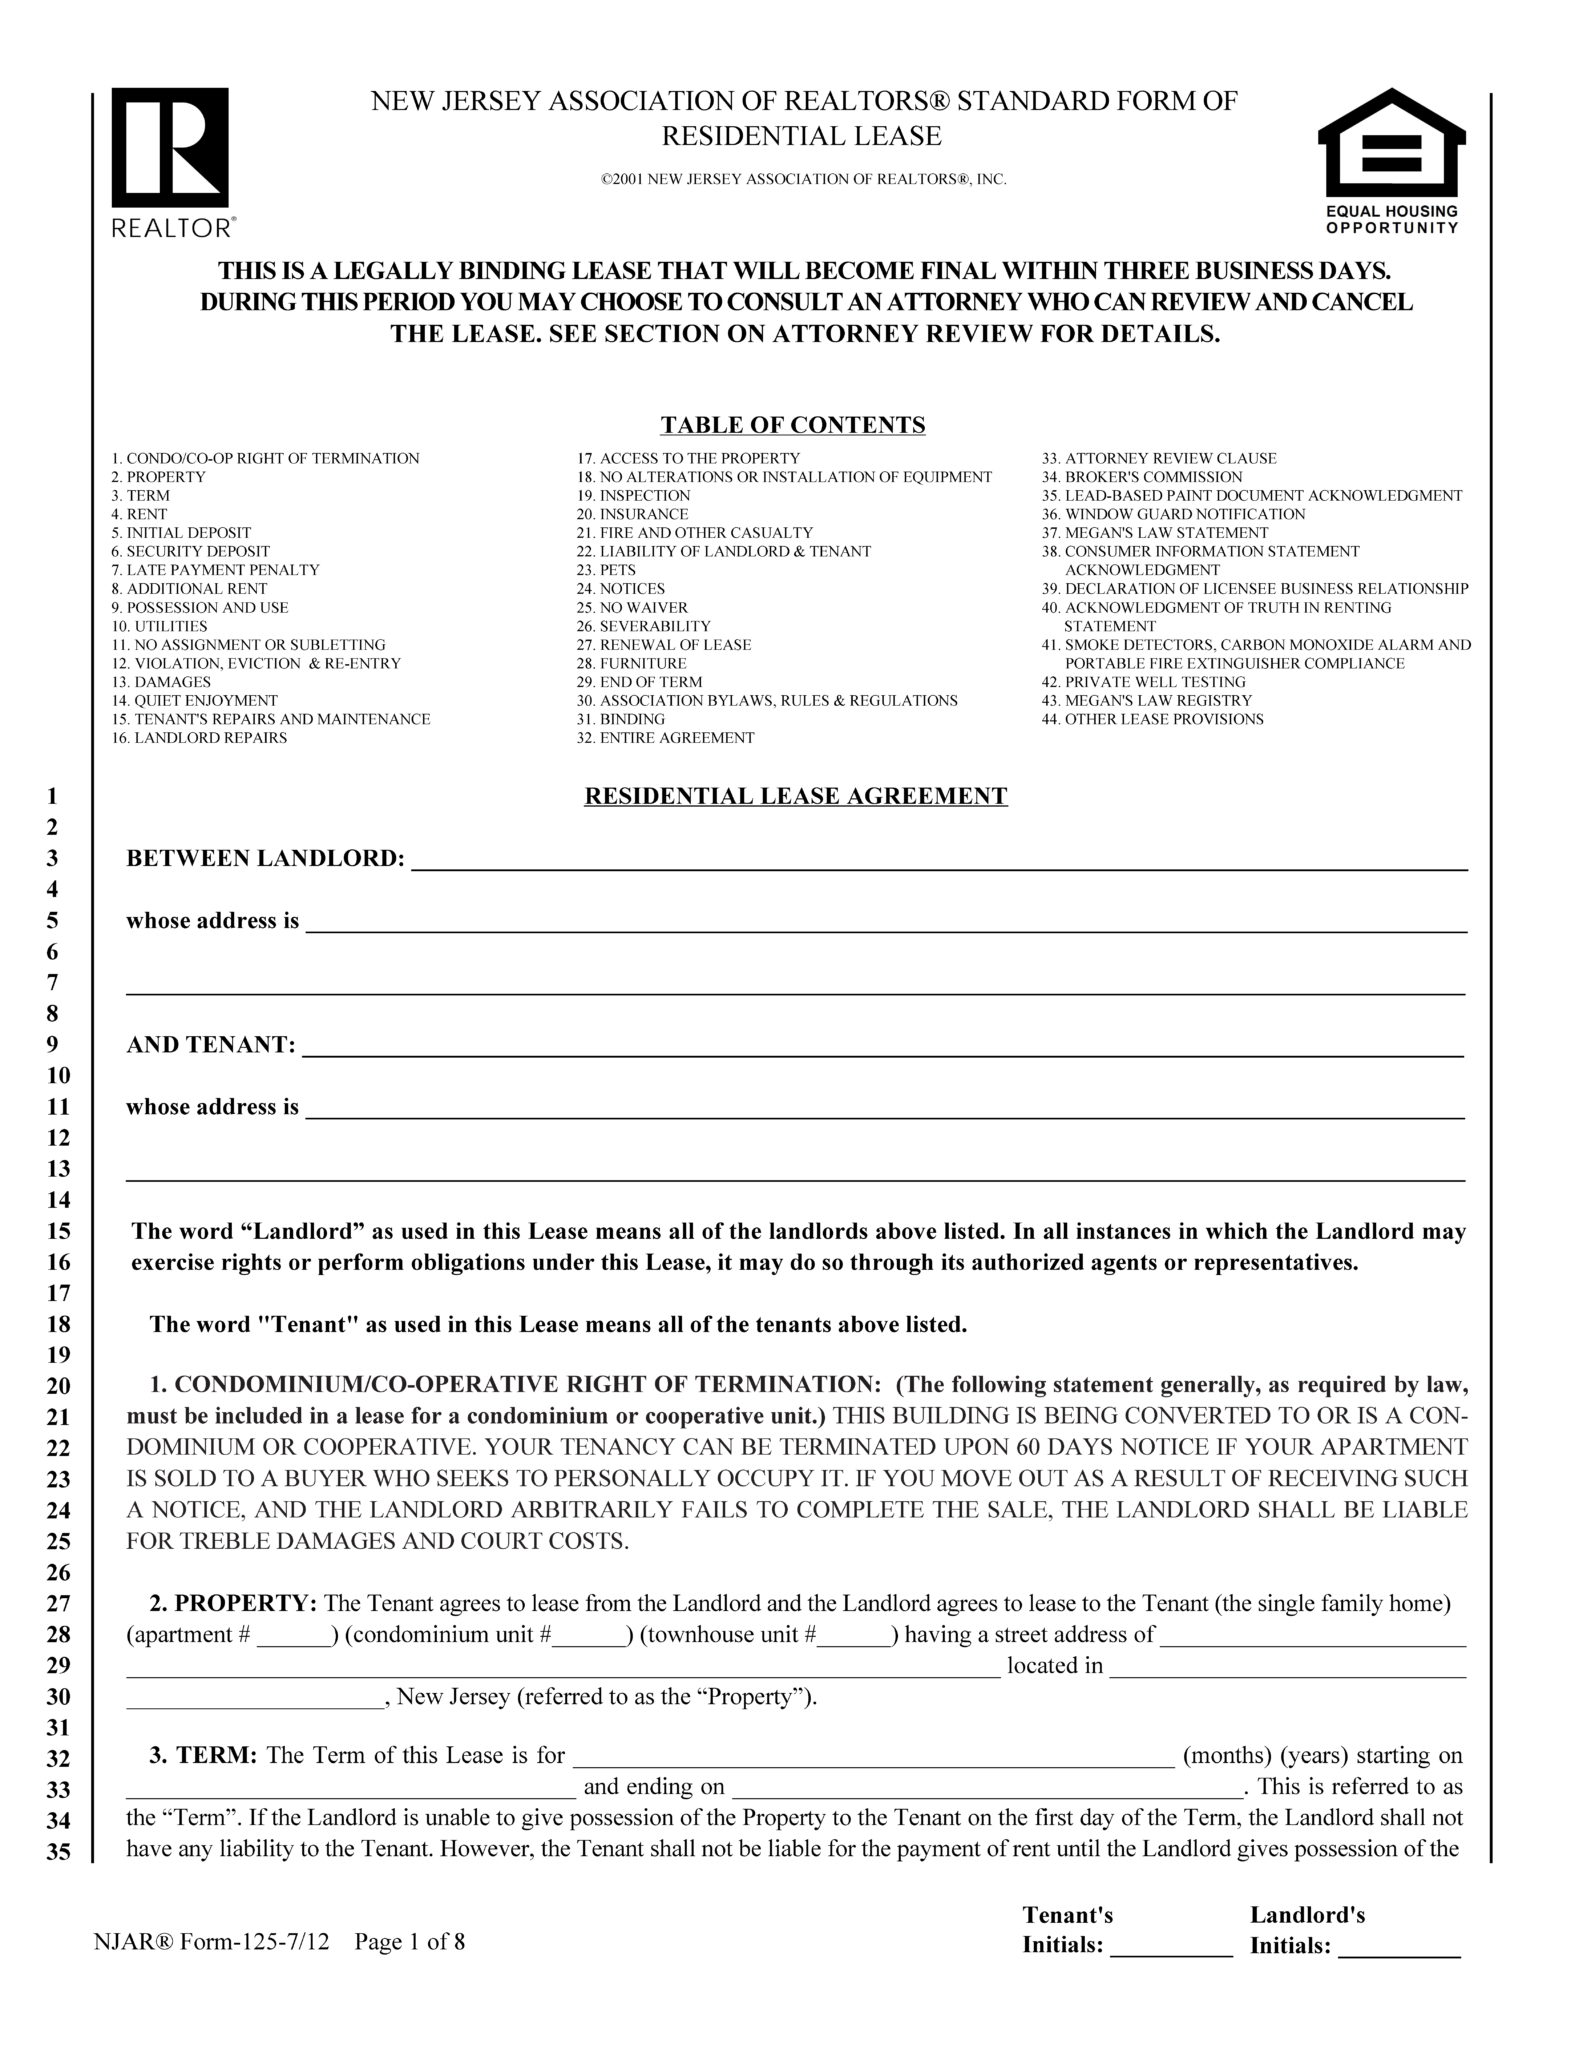 New Jersey residential appliance installer license prep class download the new for mac